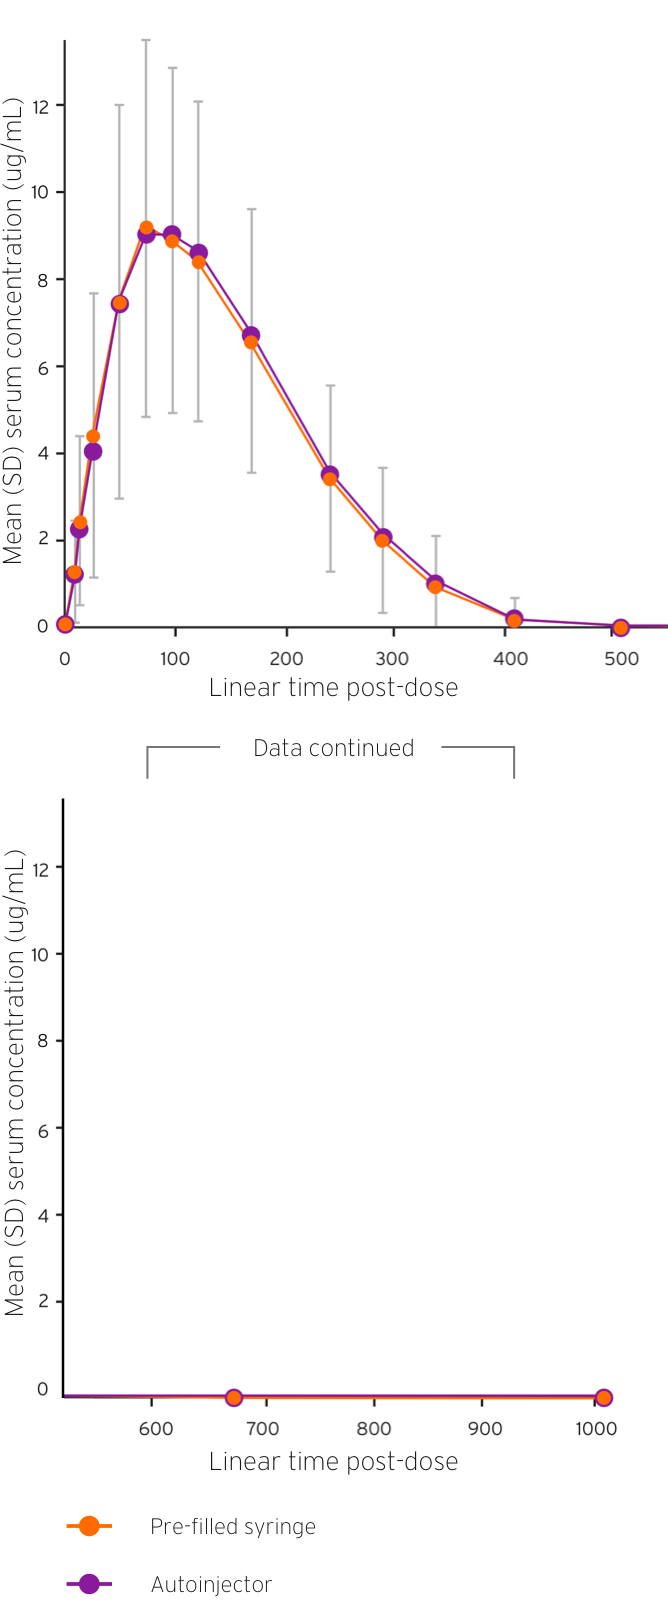 Line graph indicating comparable PK profiles between TYENNE autoinjector and TYENNE pre-filled syringe